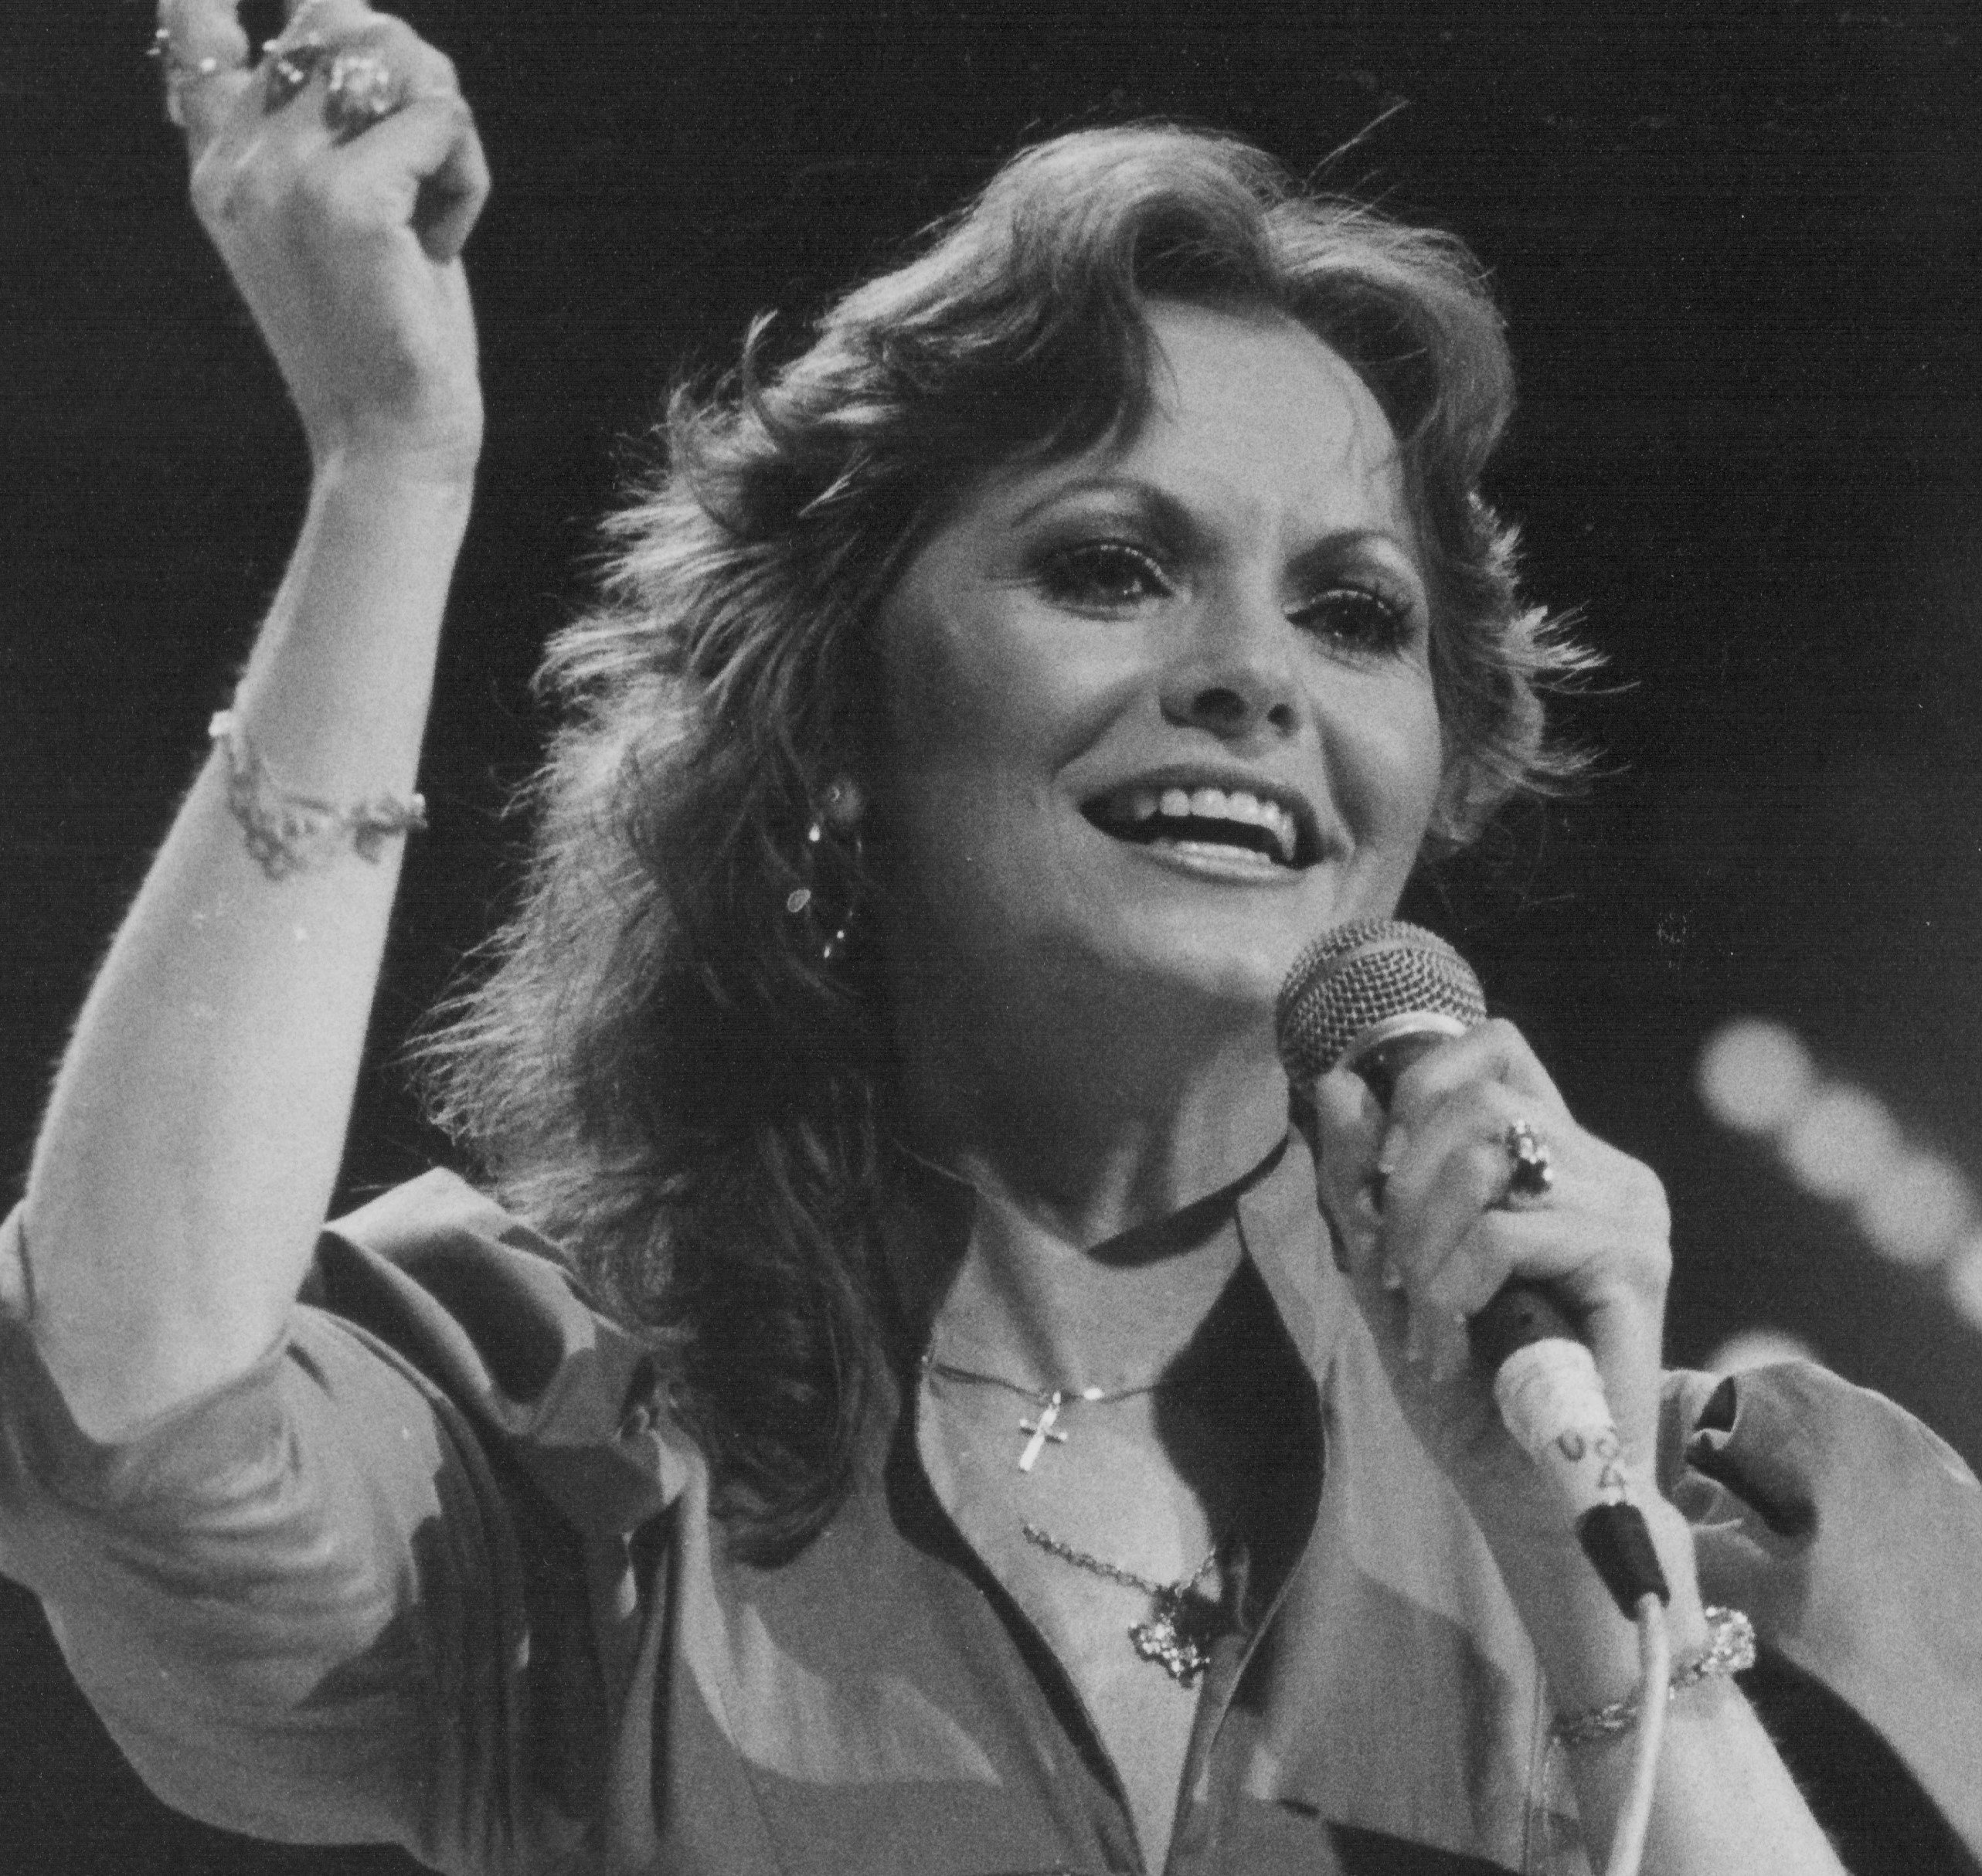 "Harper Valley PTA" singer Jeannie C. Riley with a microphone